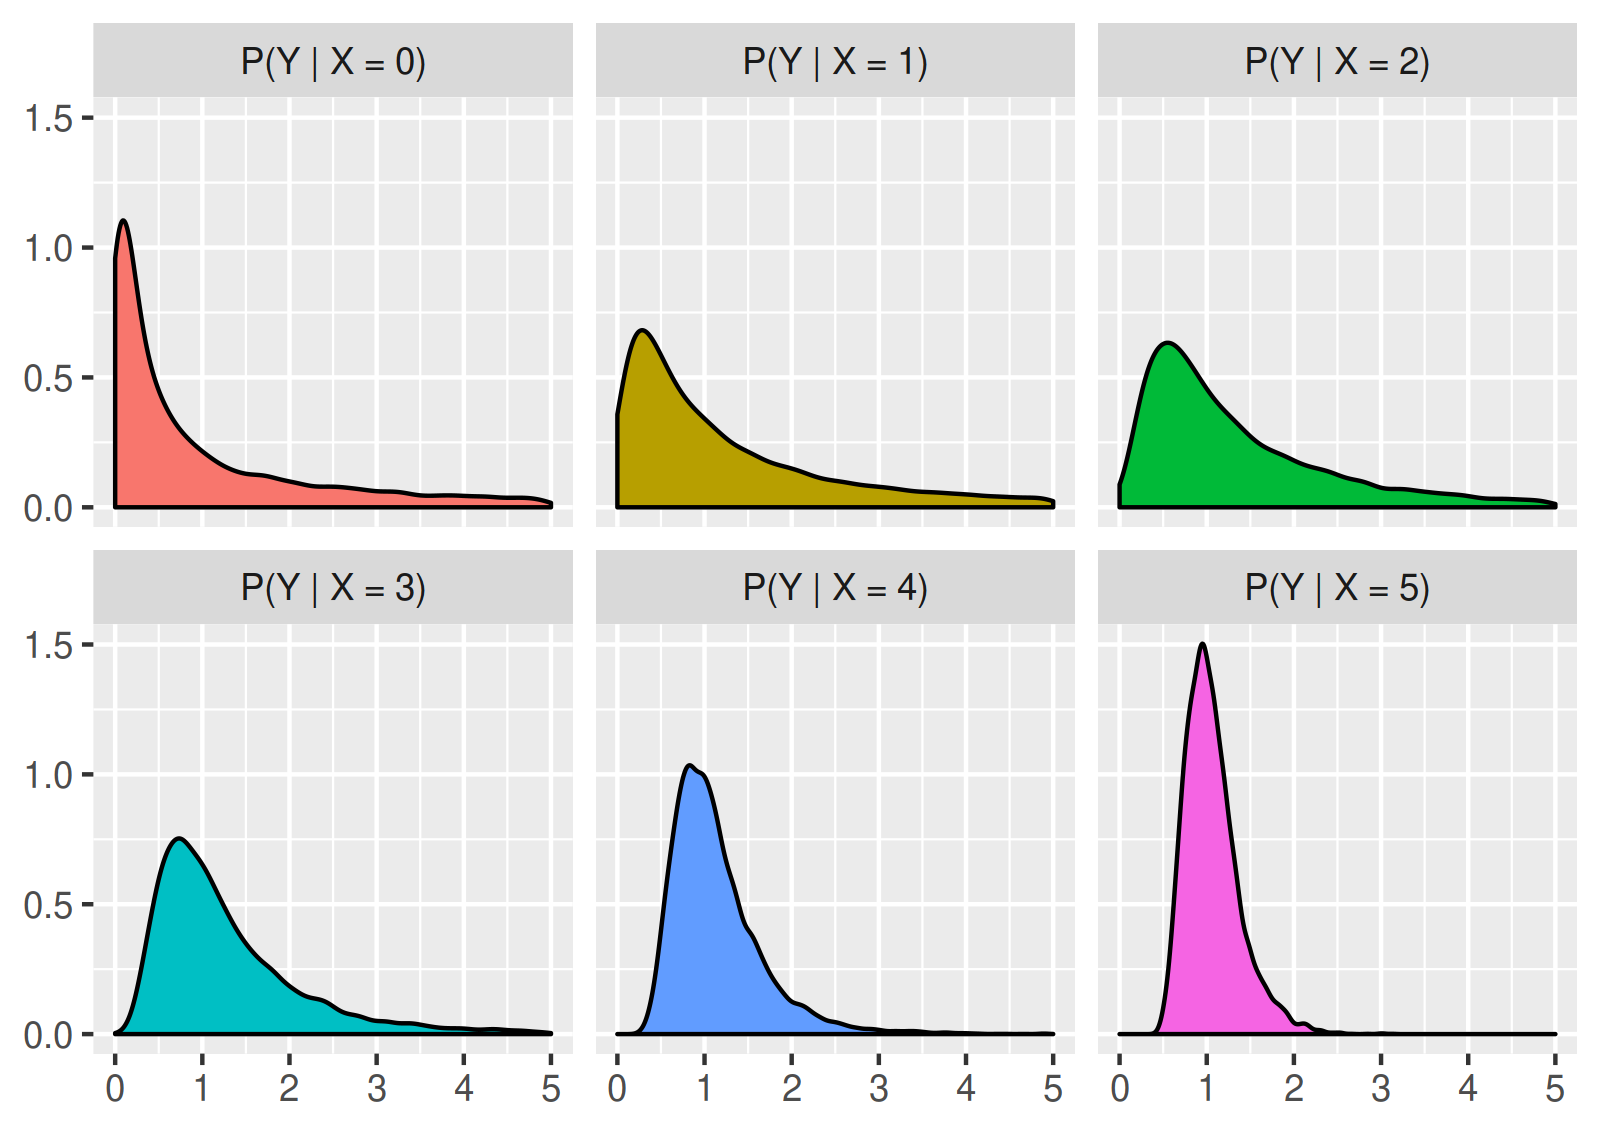 Probability density functions of (Y|X=x) for different values x